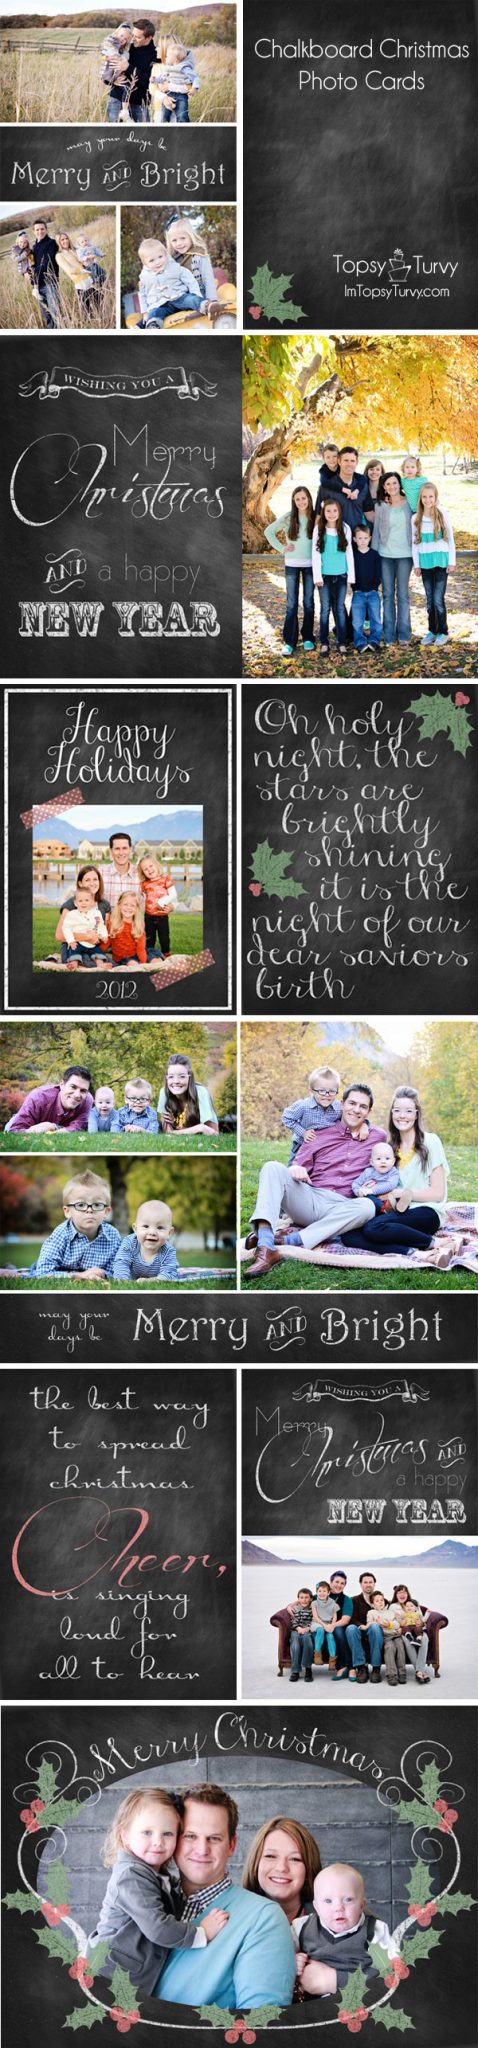 It's time to start creating holiday cards! Find the perfect Free Holiday Photo Card Templates to go with pictures of your beautiful family.